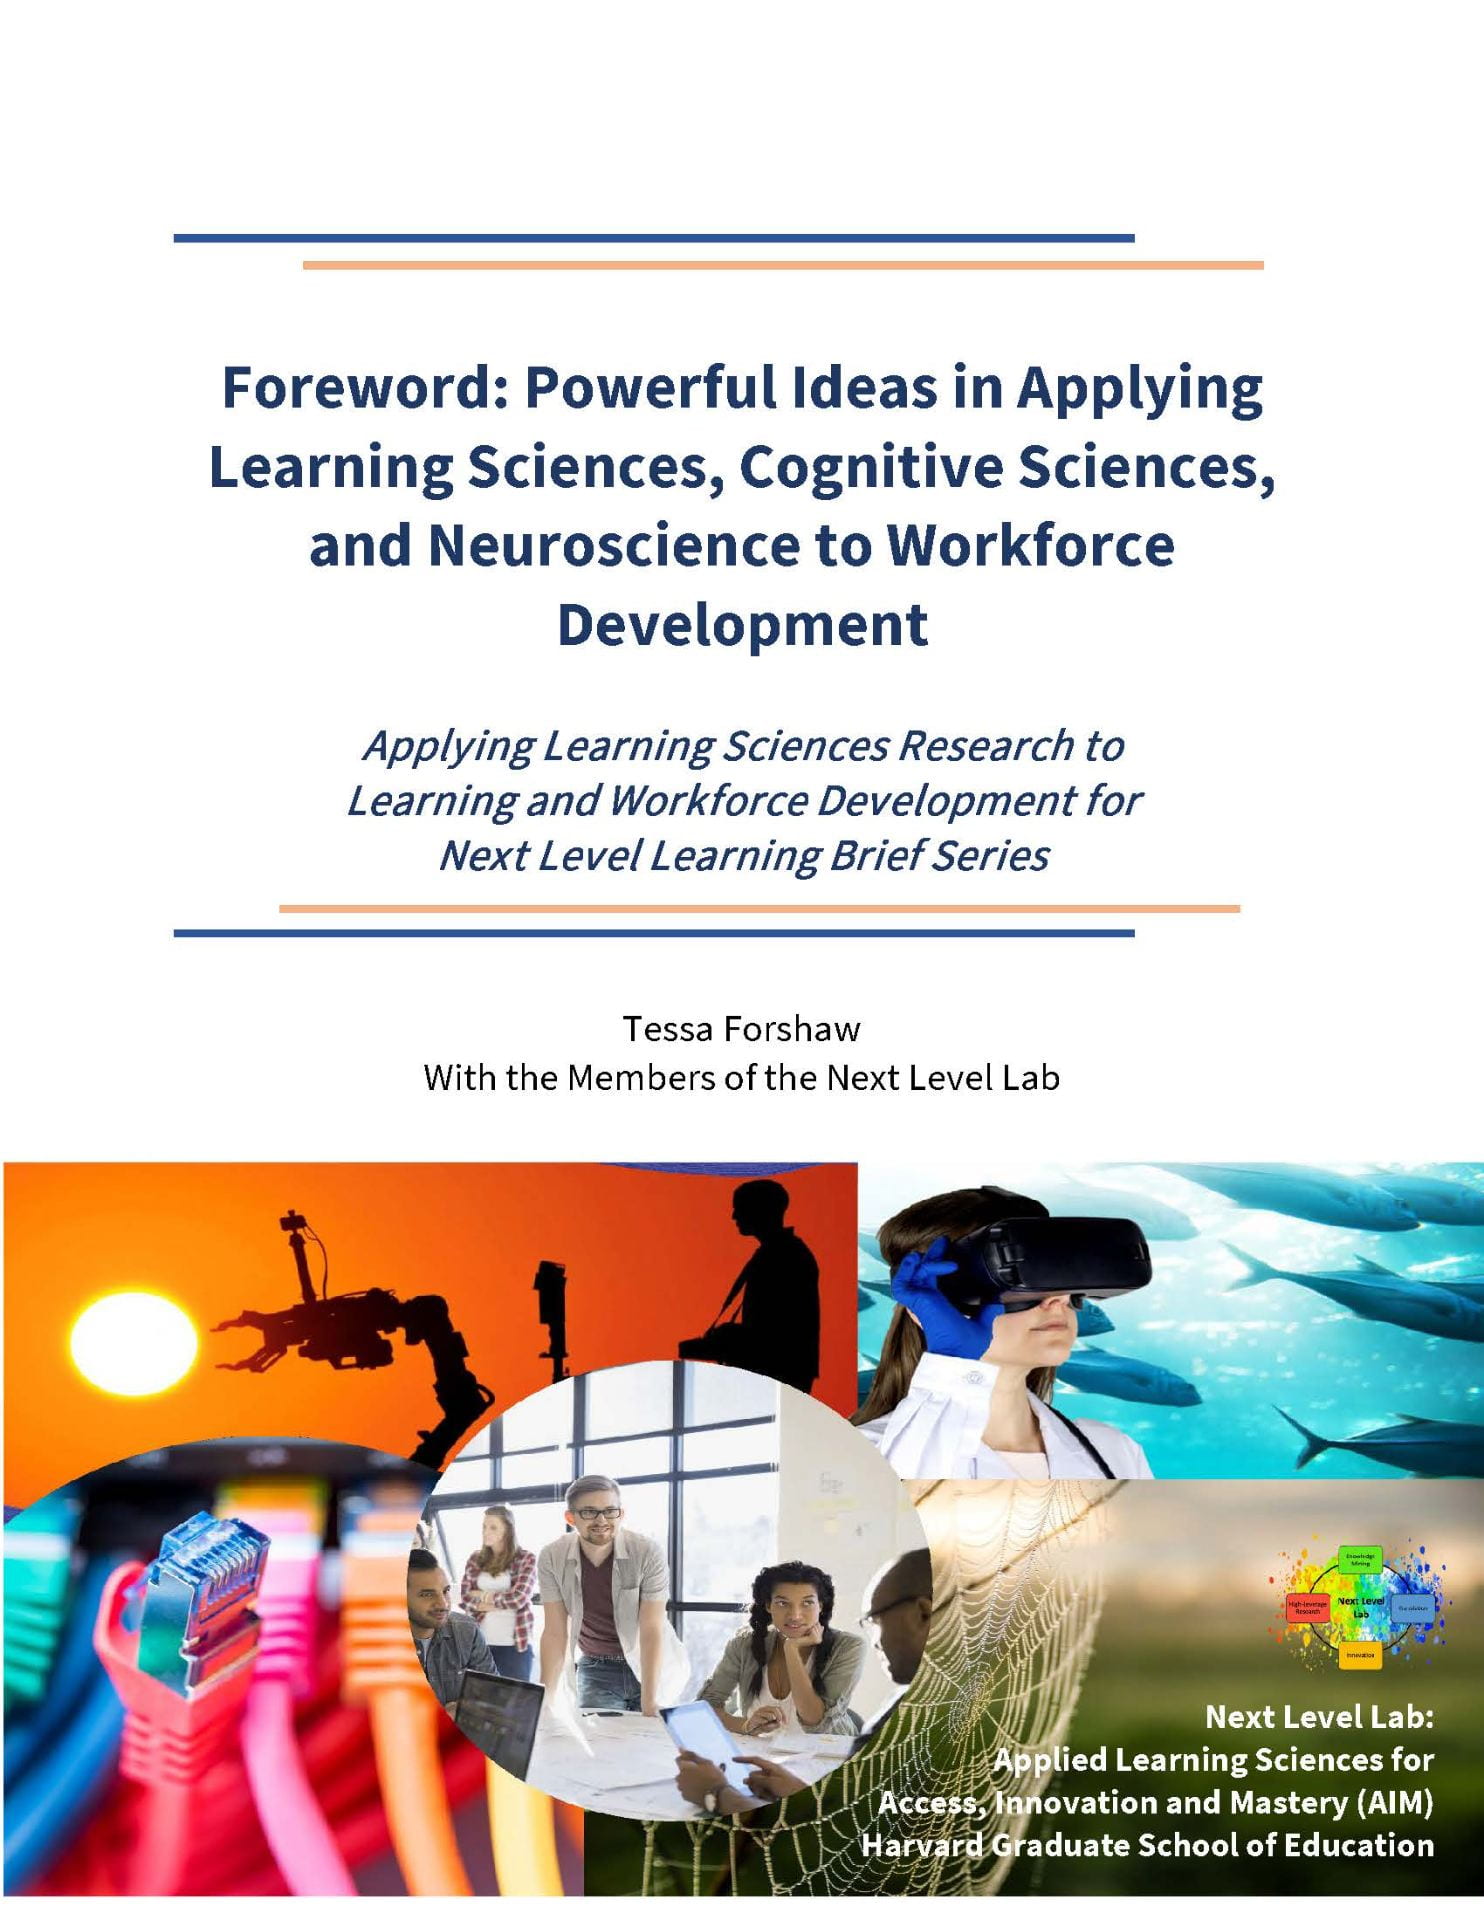 Powerful Ideas in Applying Learning Sciences, Cognitive Sciences, and Neuroscience to Workforce Development